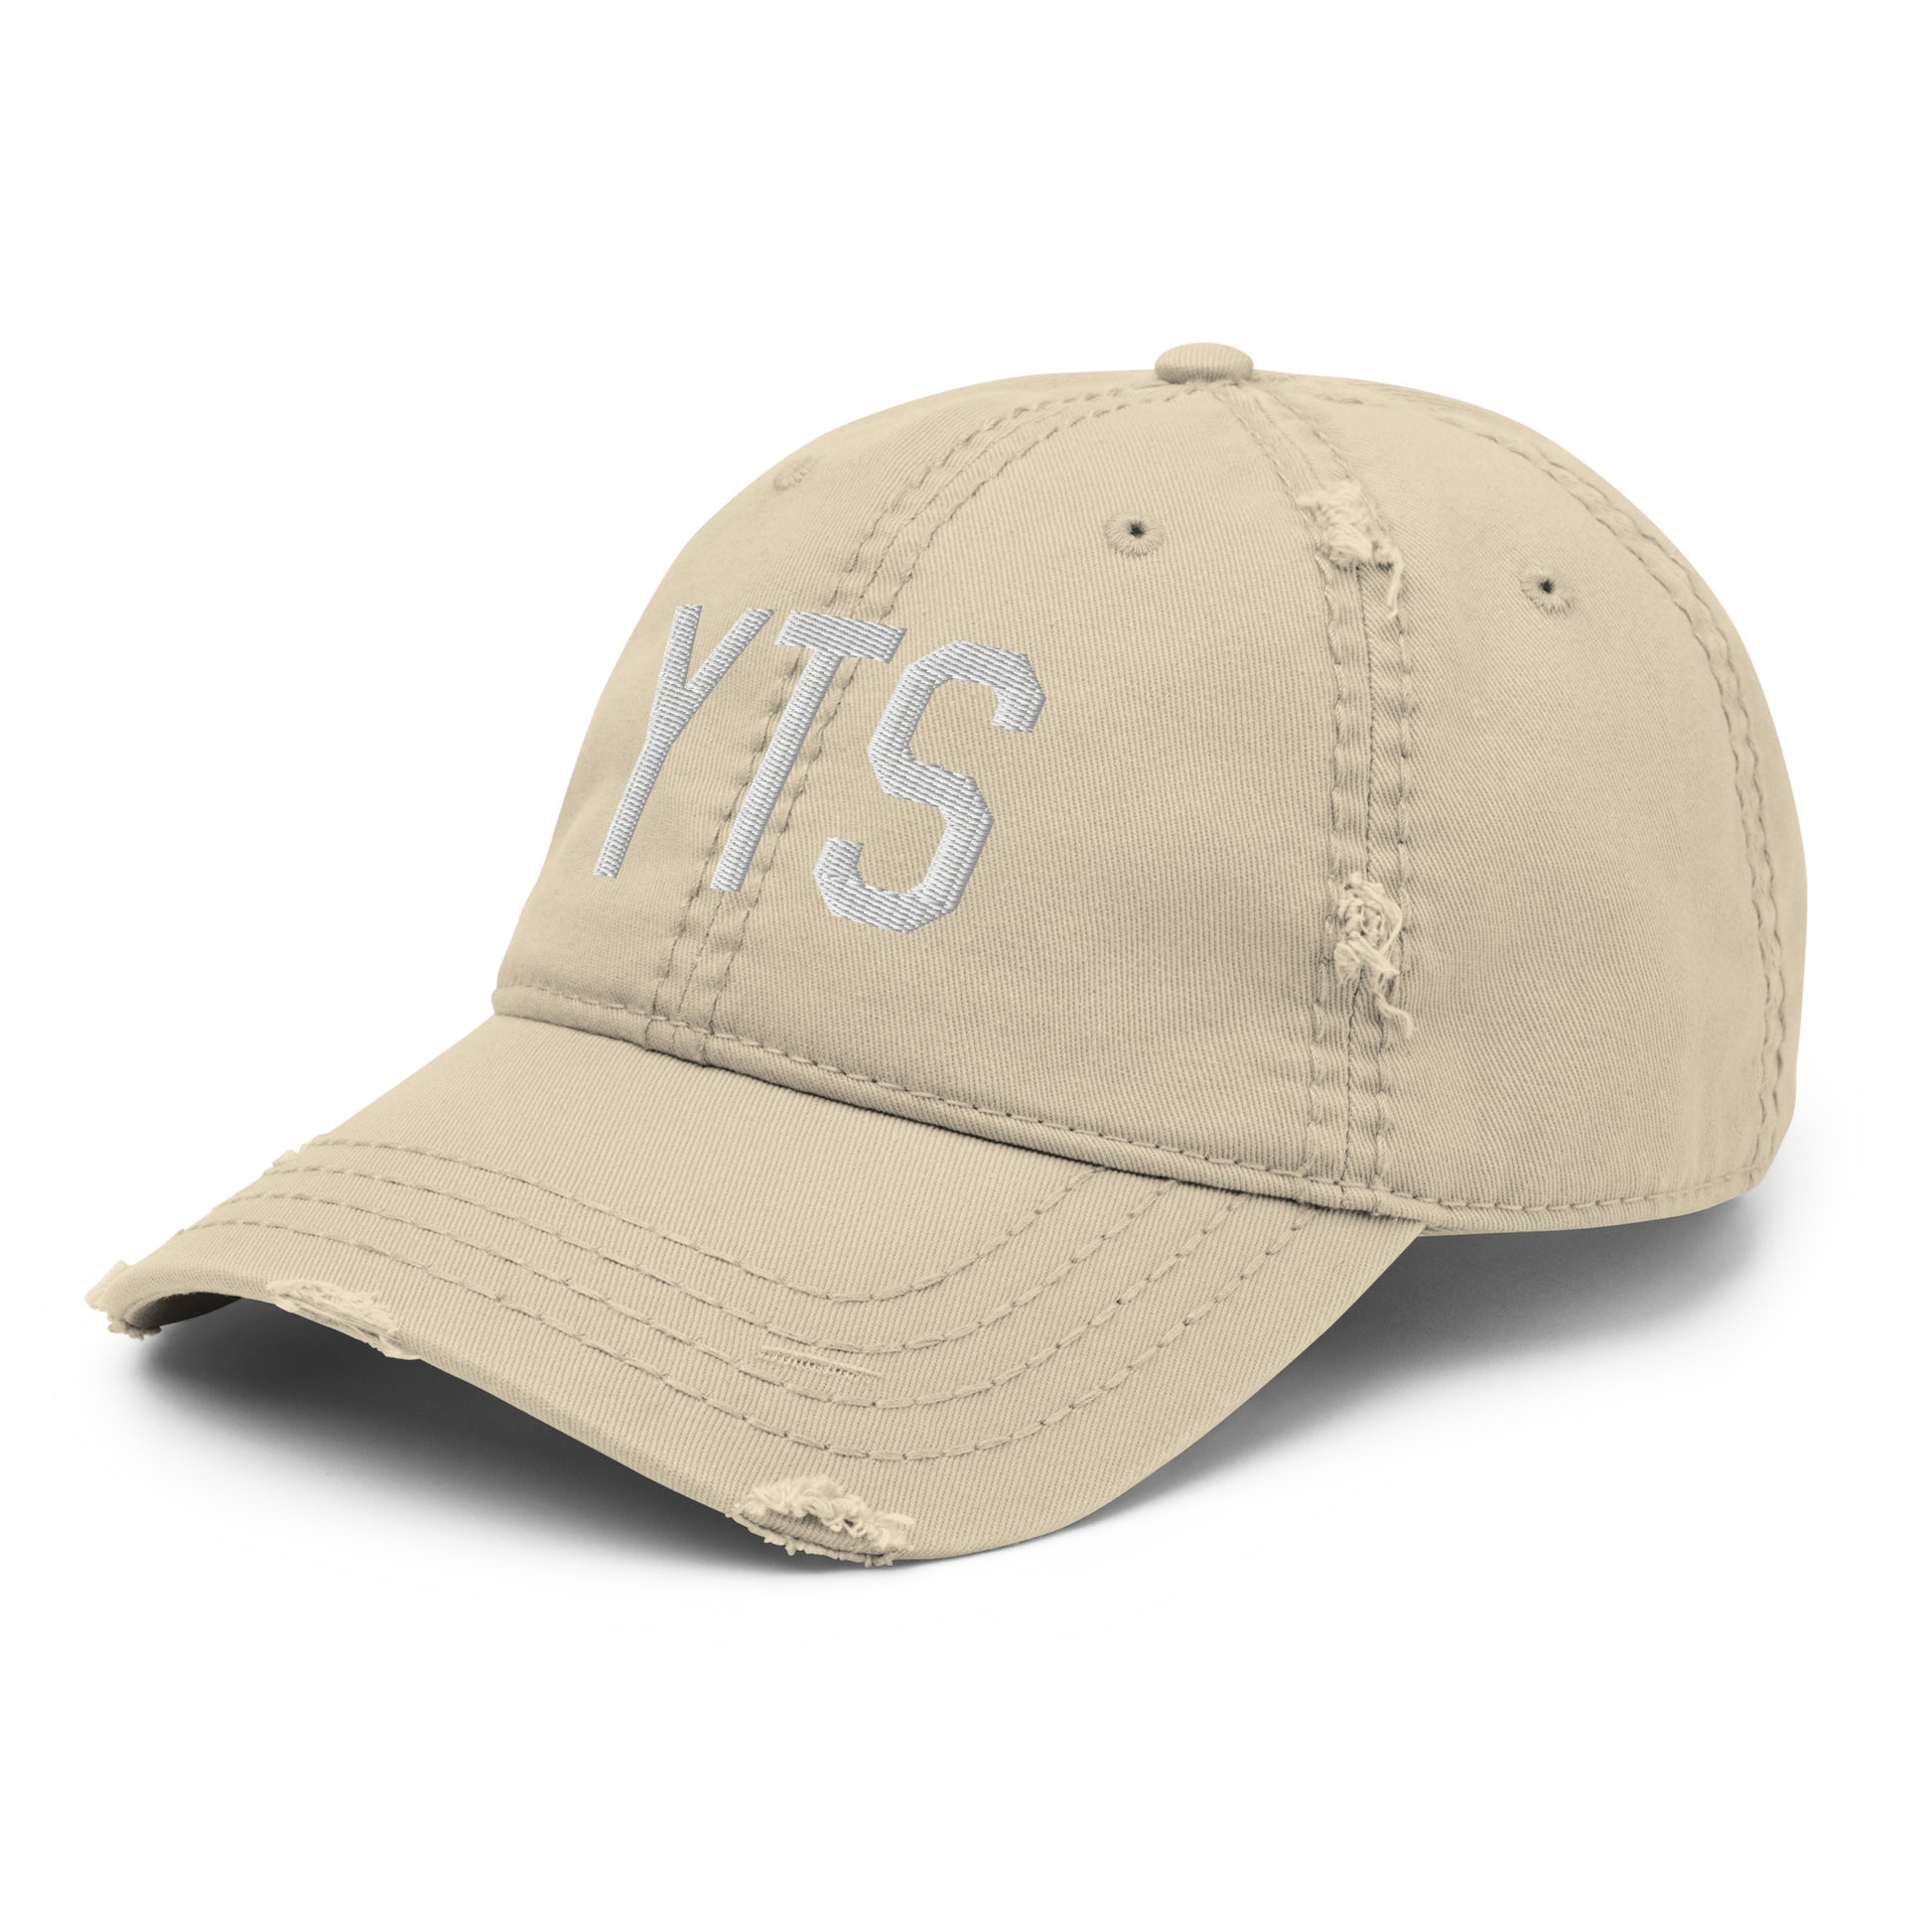 Airport Code Distressed Hat - White • YTS Timmins • YHM Designs - Image 19